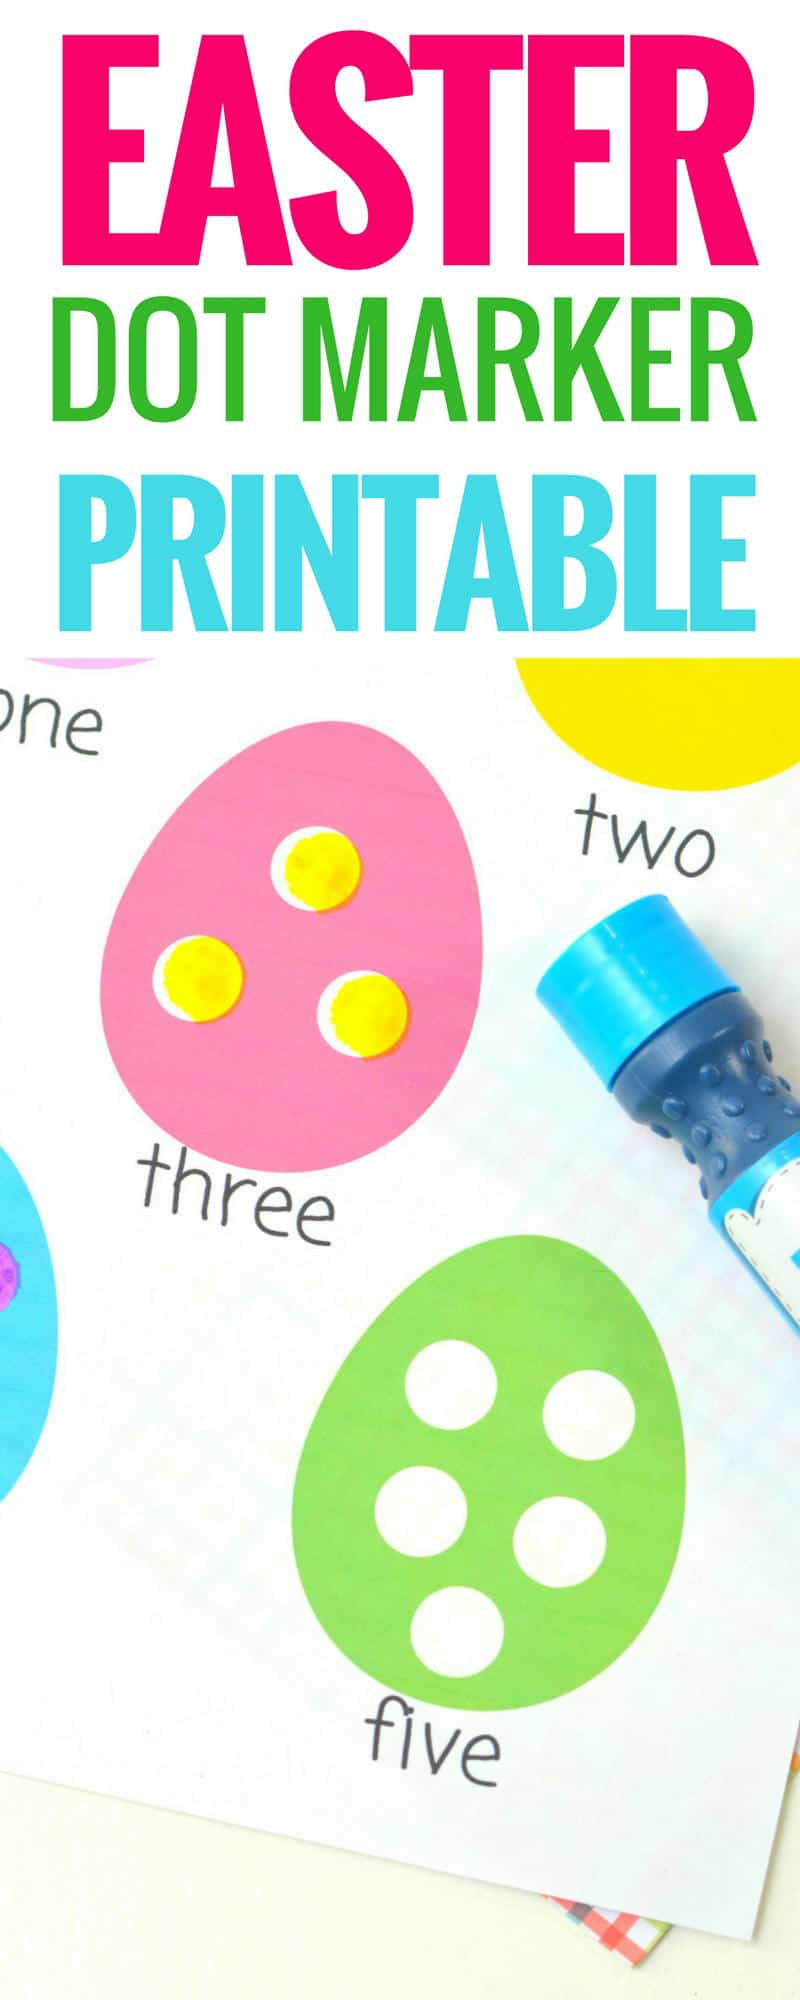 Easter dot marker printable. Easter's the perfect time to cuddle up with the kids and have some fun with some number and counting activities! Dot markers are a lot of fun to use, plus they're low mess and easy to clean up. dot marker printable | free dot marker printable numbers | dot marker activities | dot marker kids | dot marker preschool | dot marker toddler | Counting activity for preschoolers